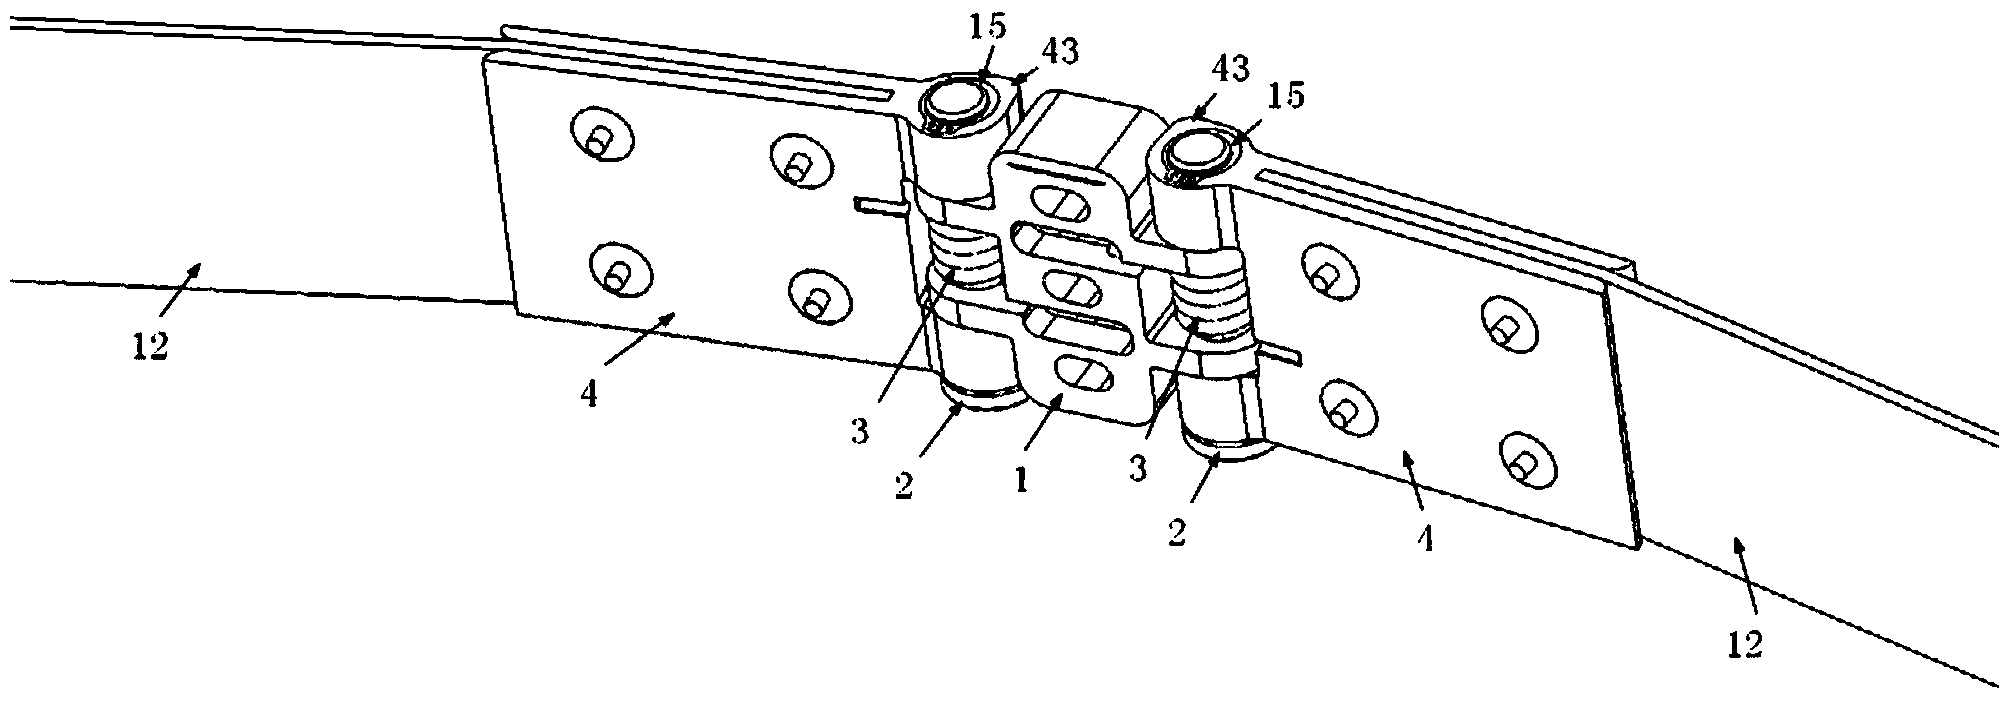 Wrapping tape locking and releasing device for expandable antenna